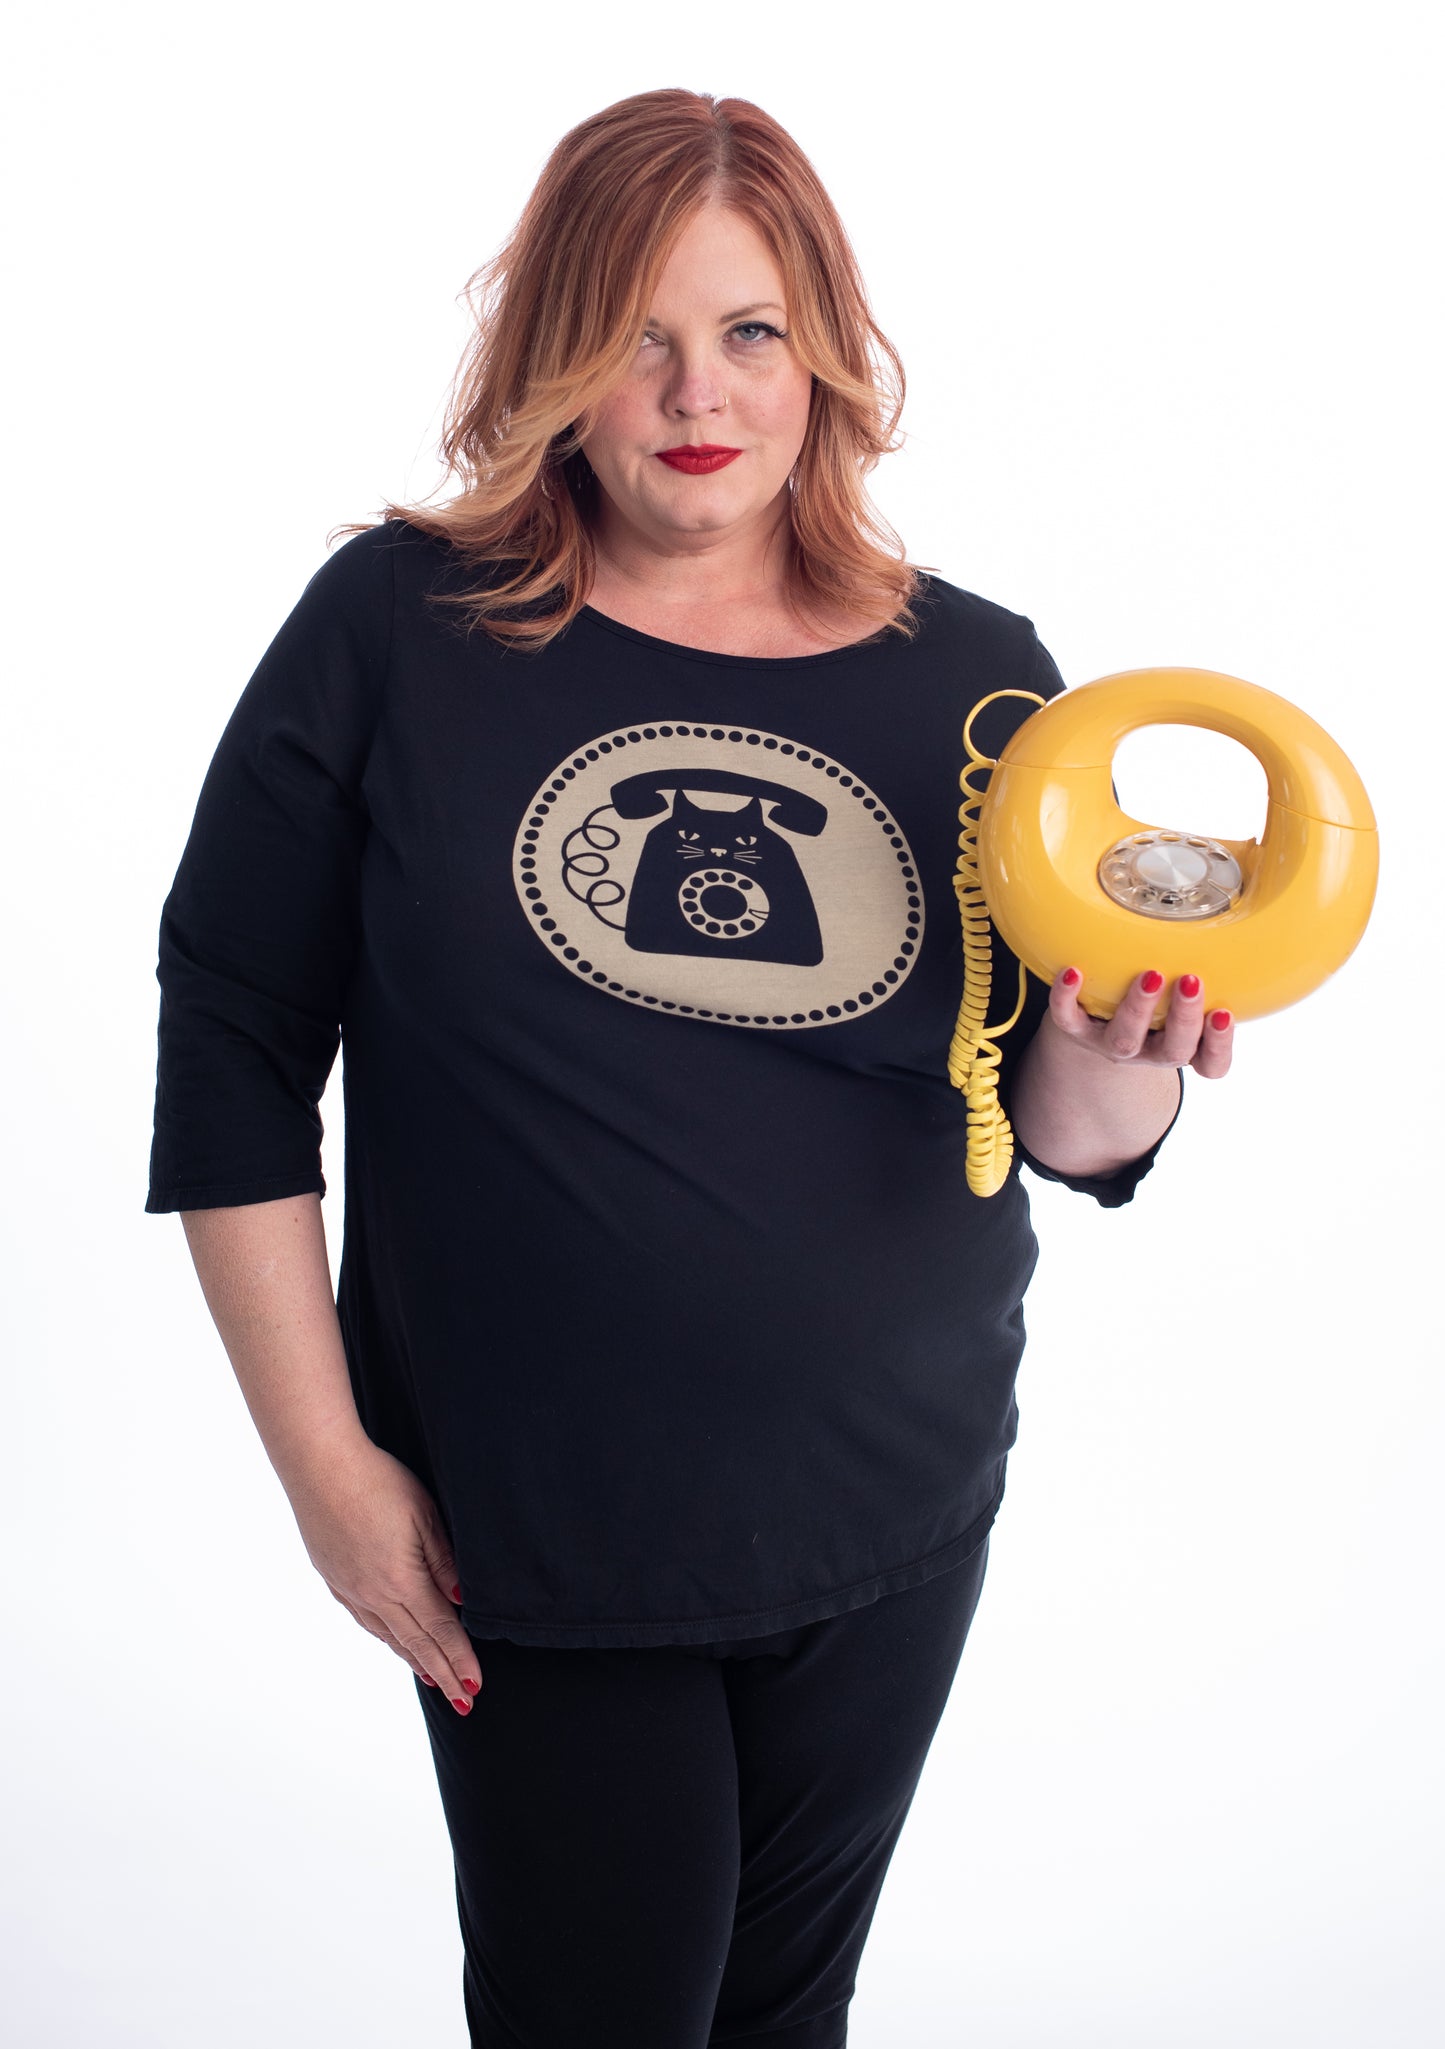 Red haired plus size model holding yellow donut phone while wearing black and white cat phone graphic 3/4 sleeve tee